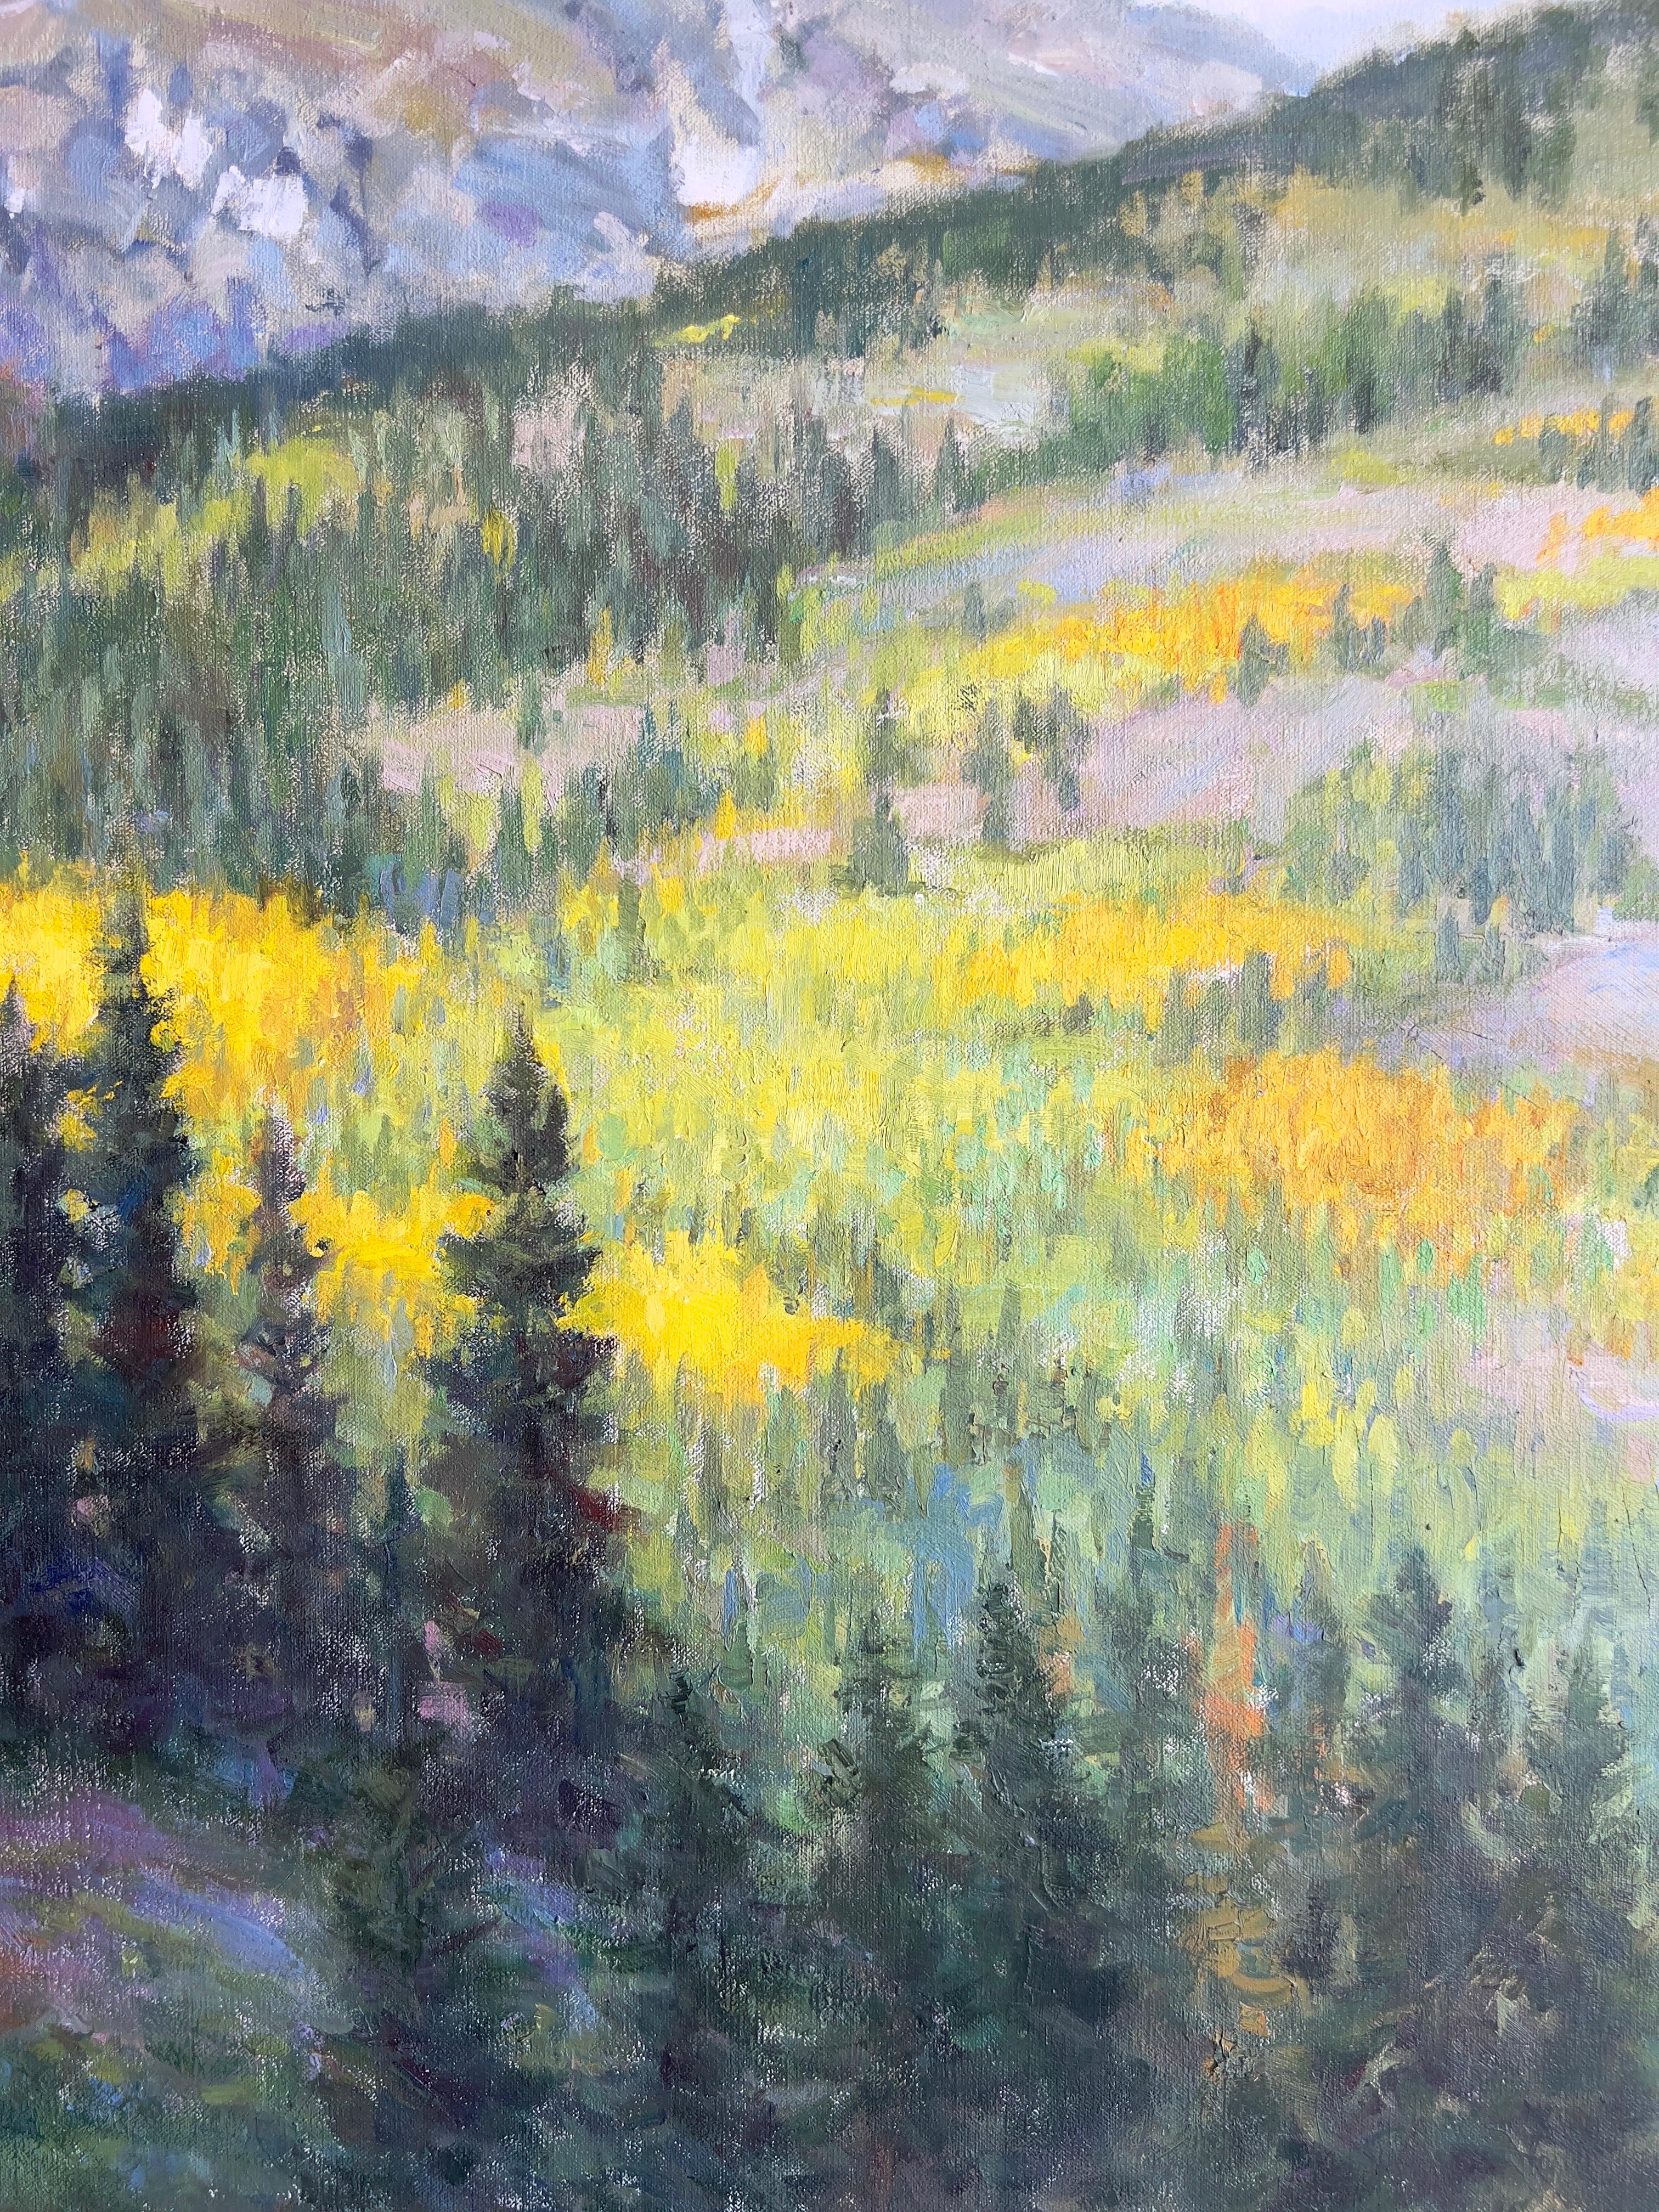 Going up to Silverton Canyon, Santa Ana mountains. - Gray Landscape Painting by Lynn Gertenbach